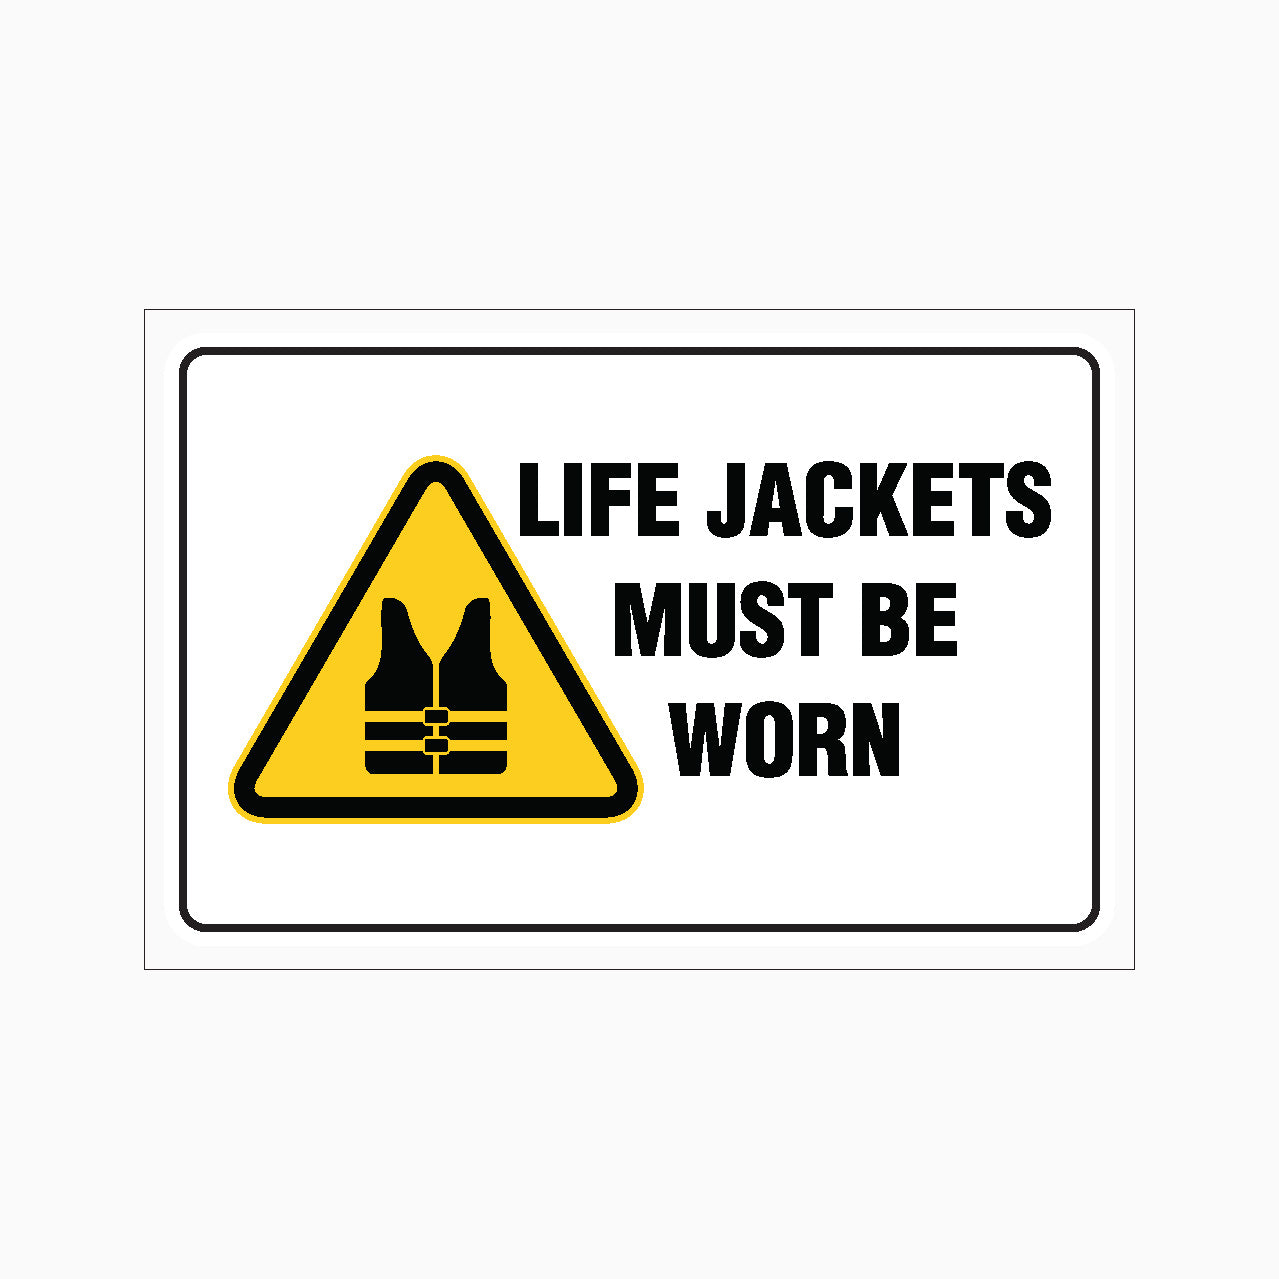 LIFE JACKETS MUST BE WORN SIGN